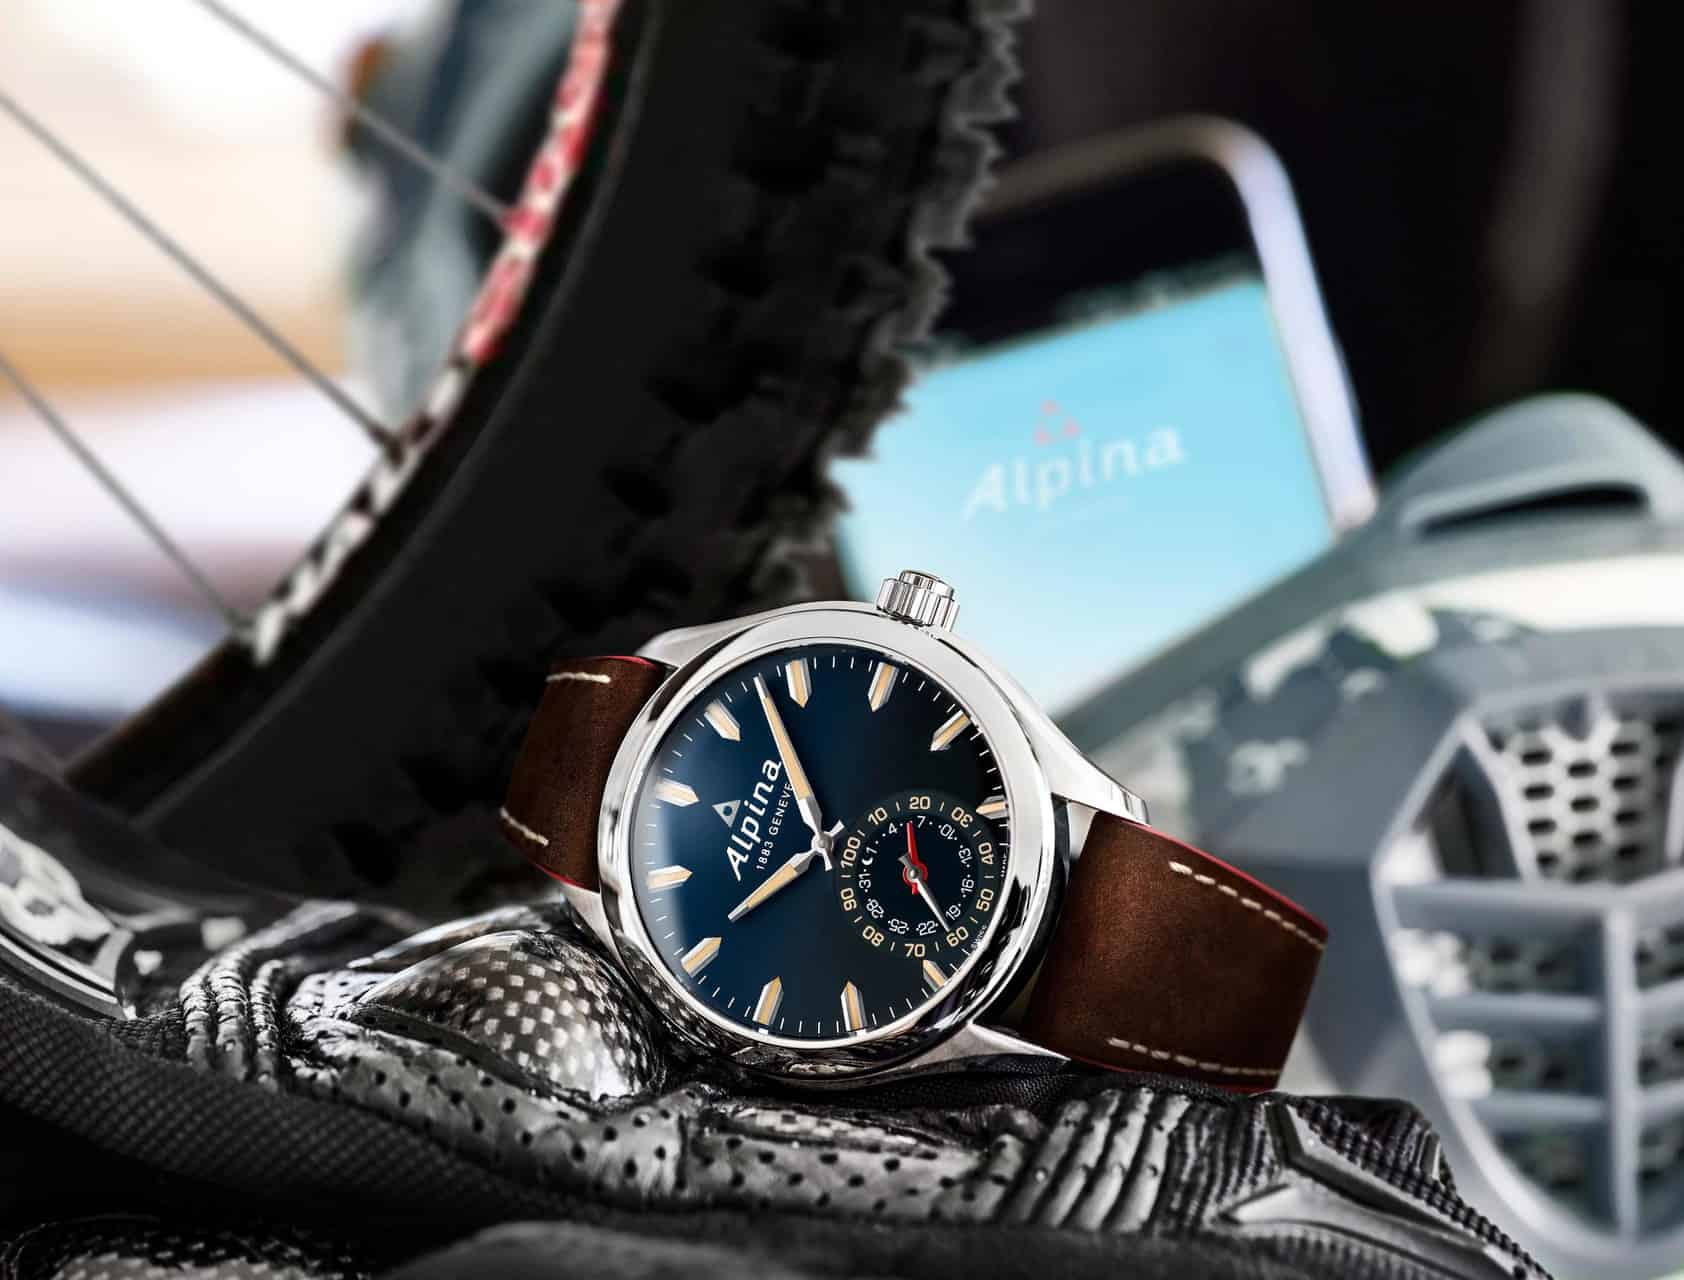 The new blue Alpina Horological Smartwatch